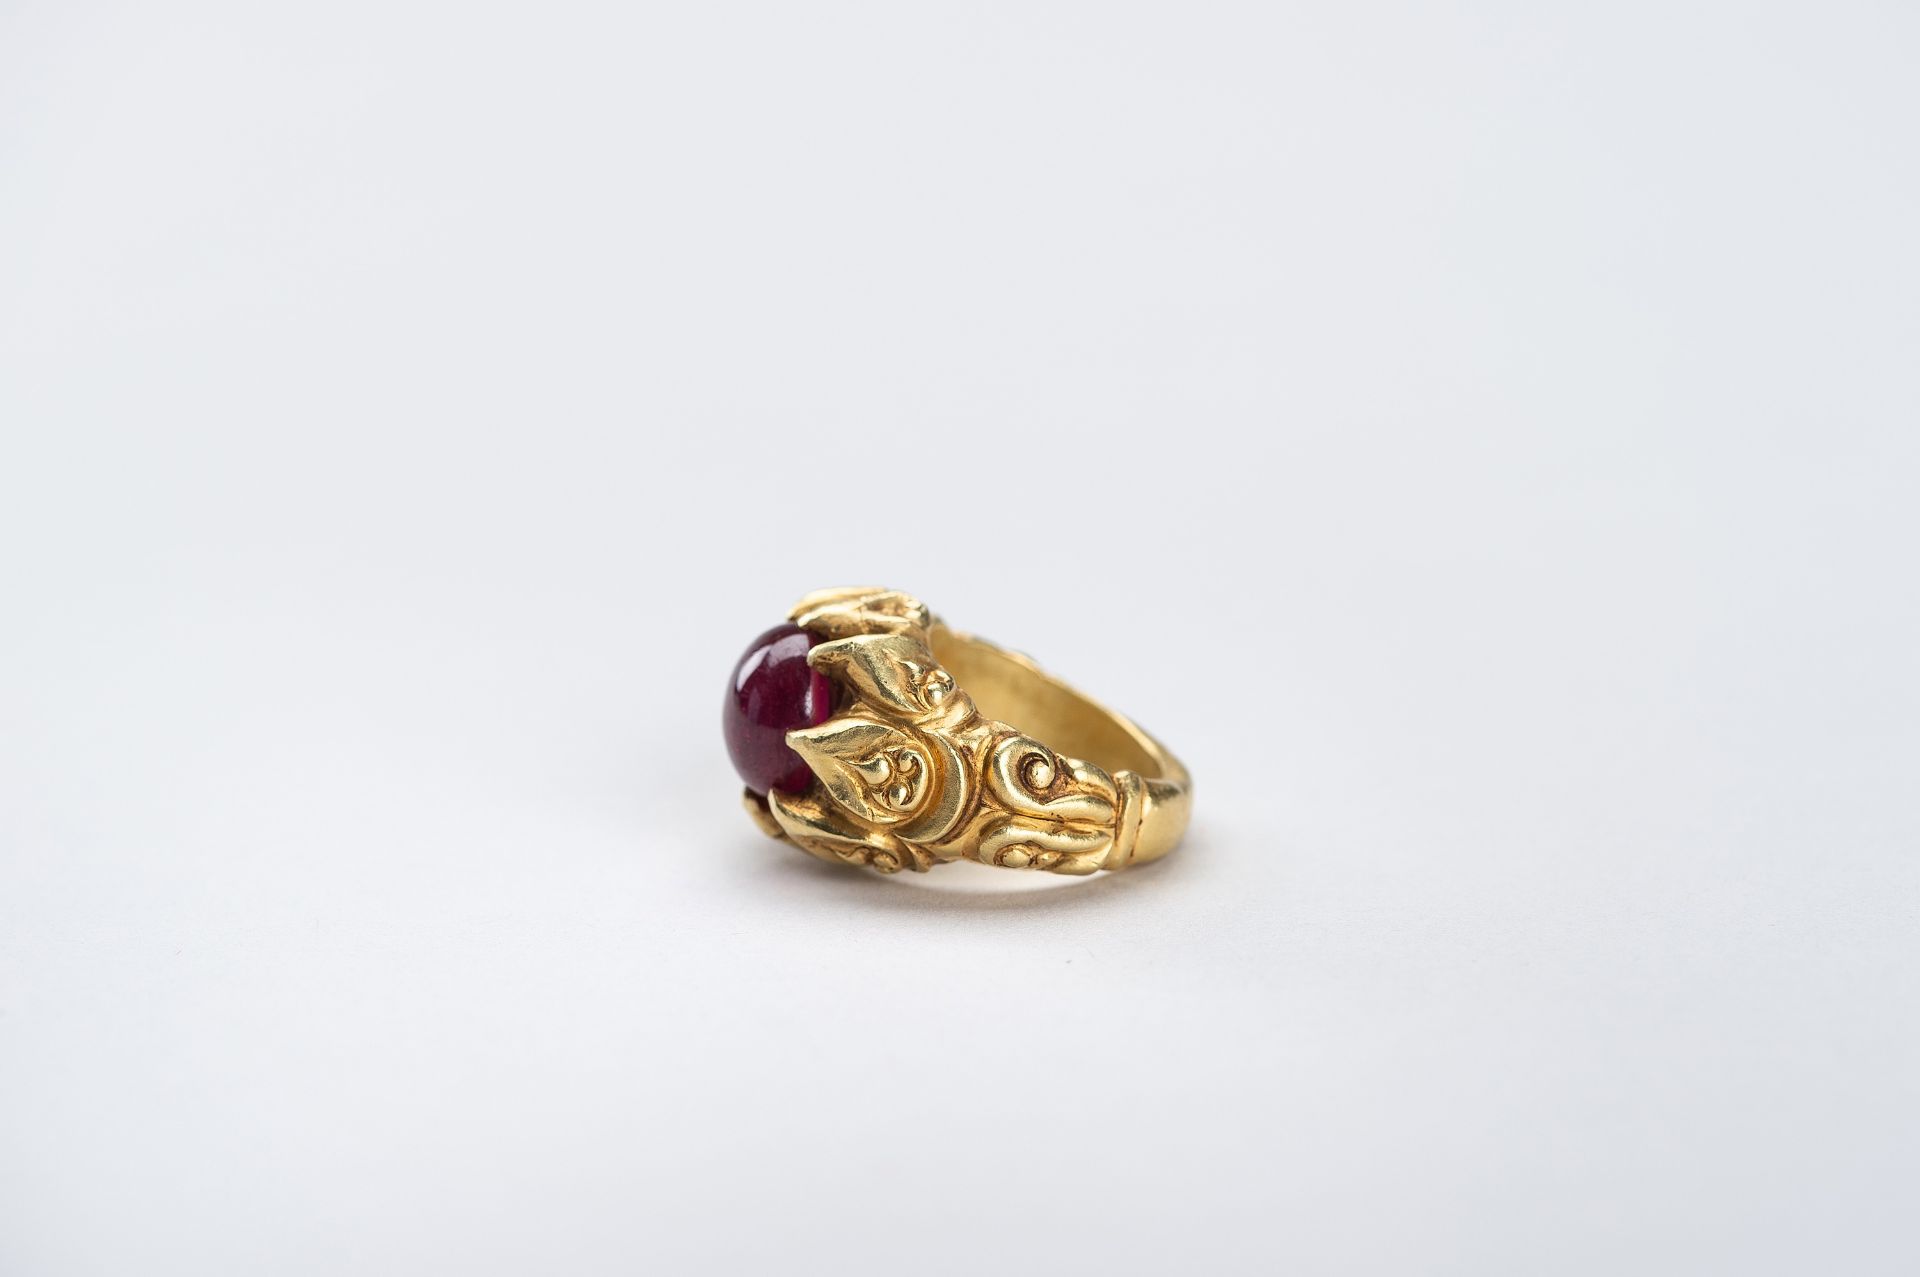 A BURMESE GOLD RING WITH 3 CARAT RUBY - Image 7 of 10